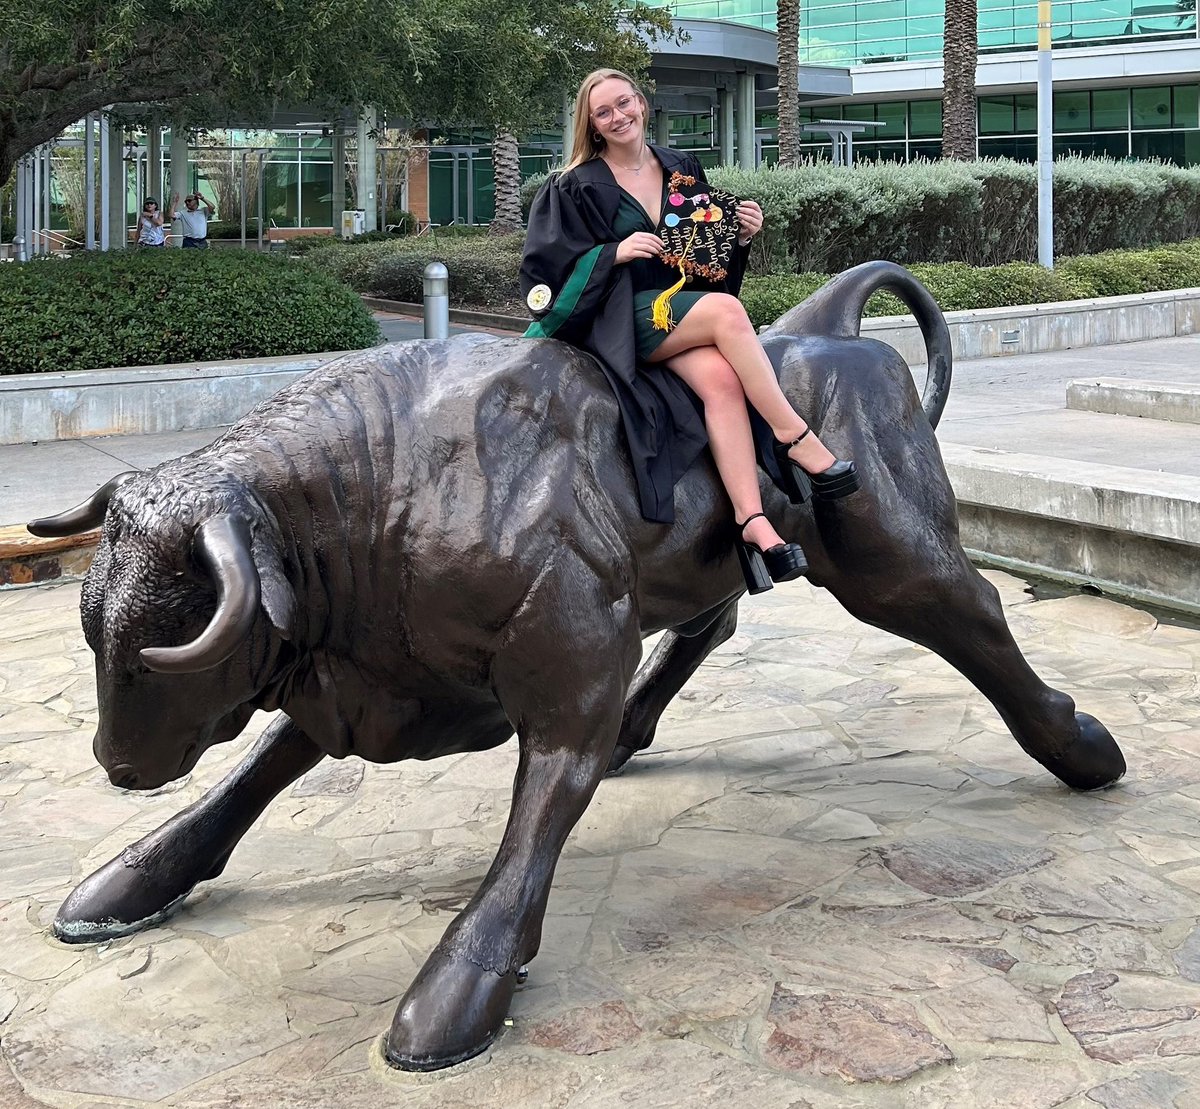 Our very own dispatcher Payton Campagna graduated from USF yesterday.